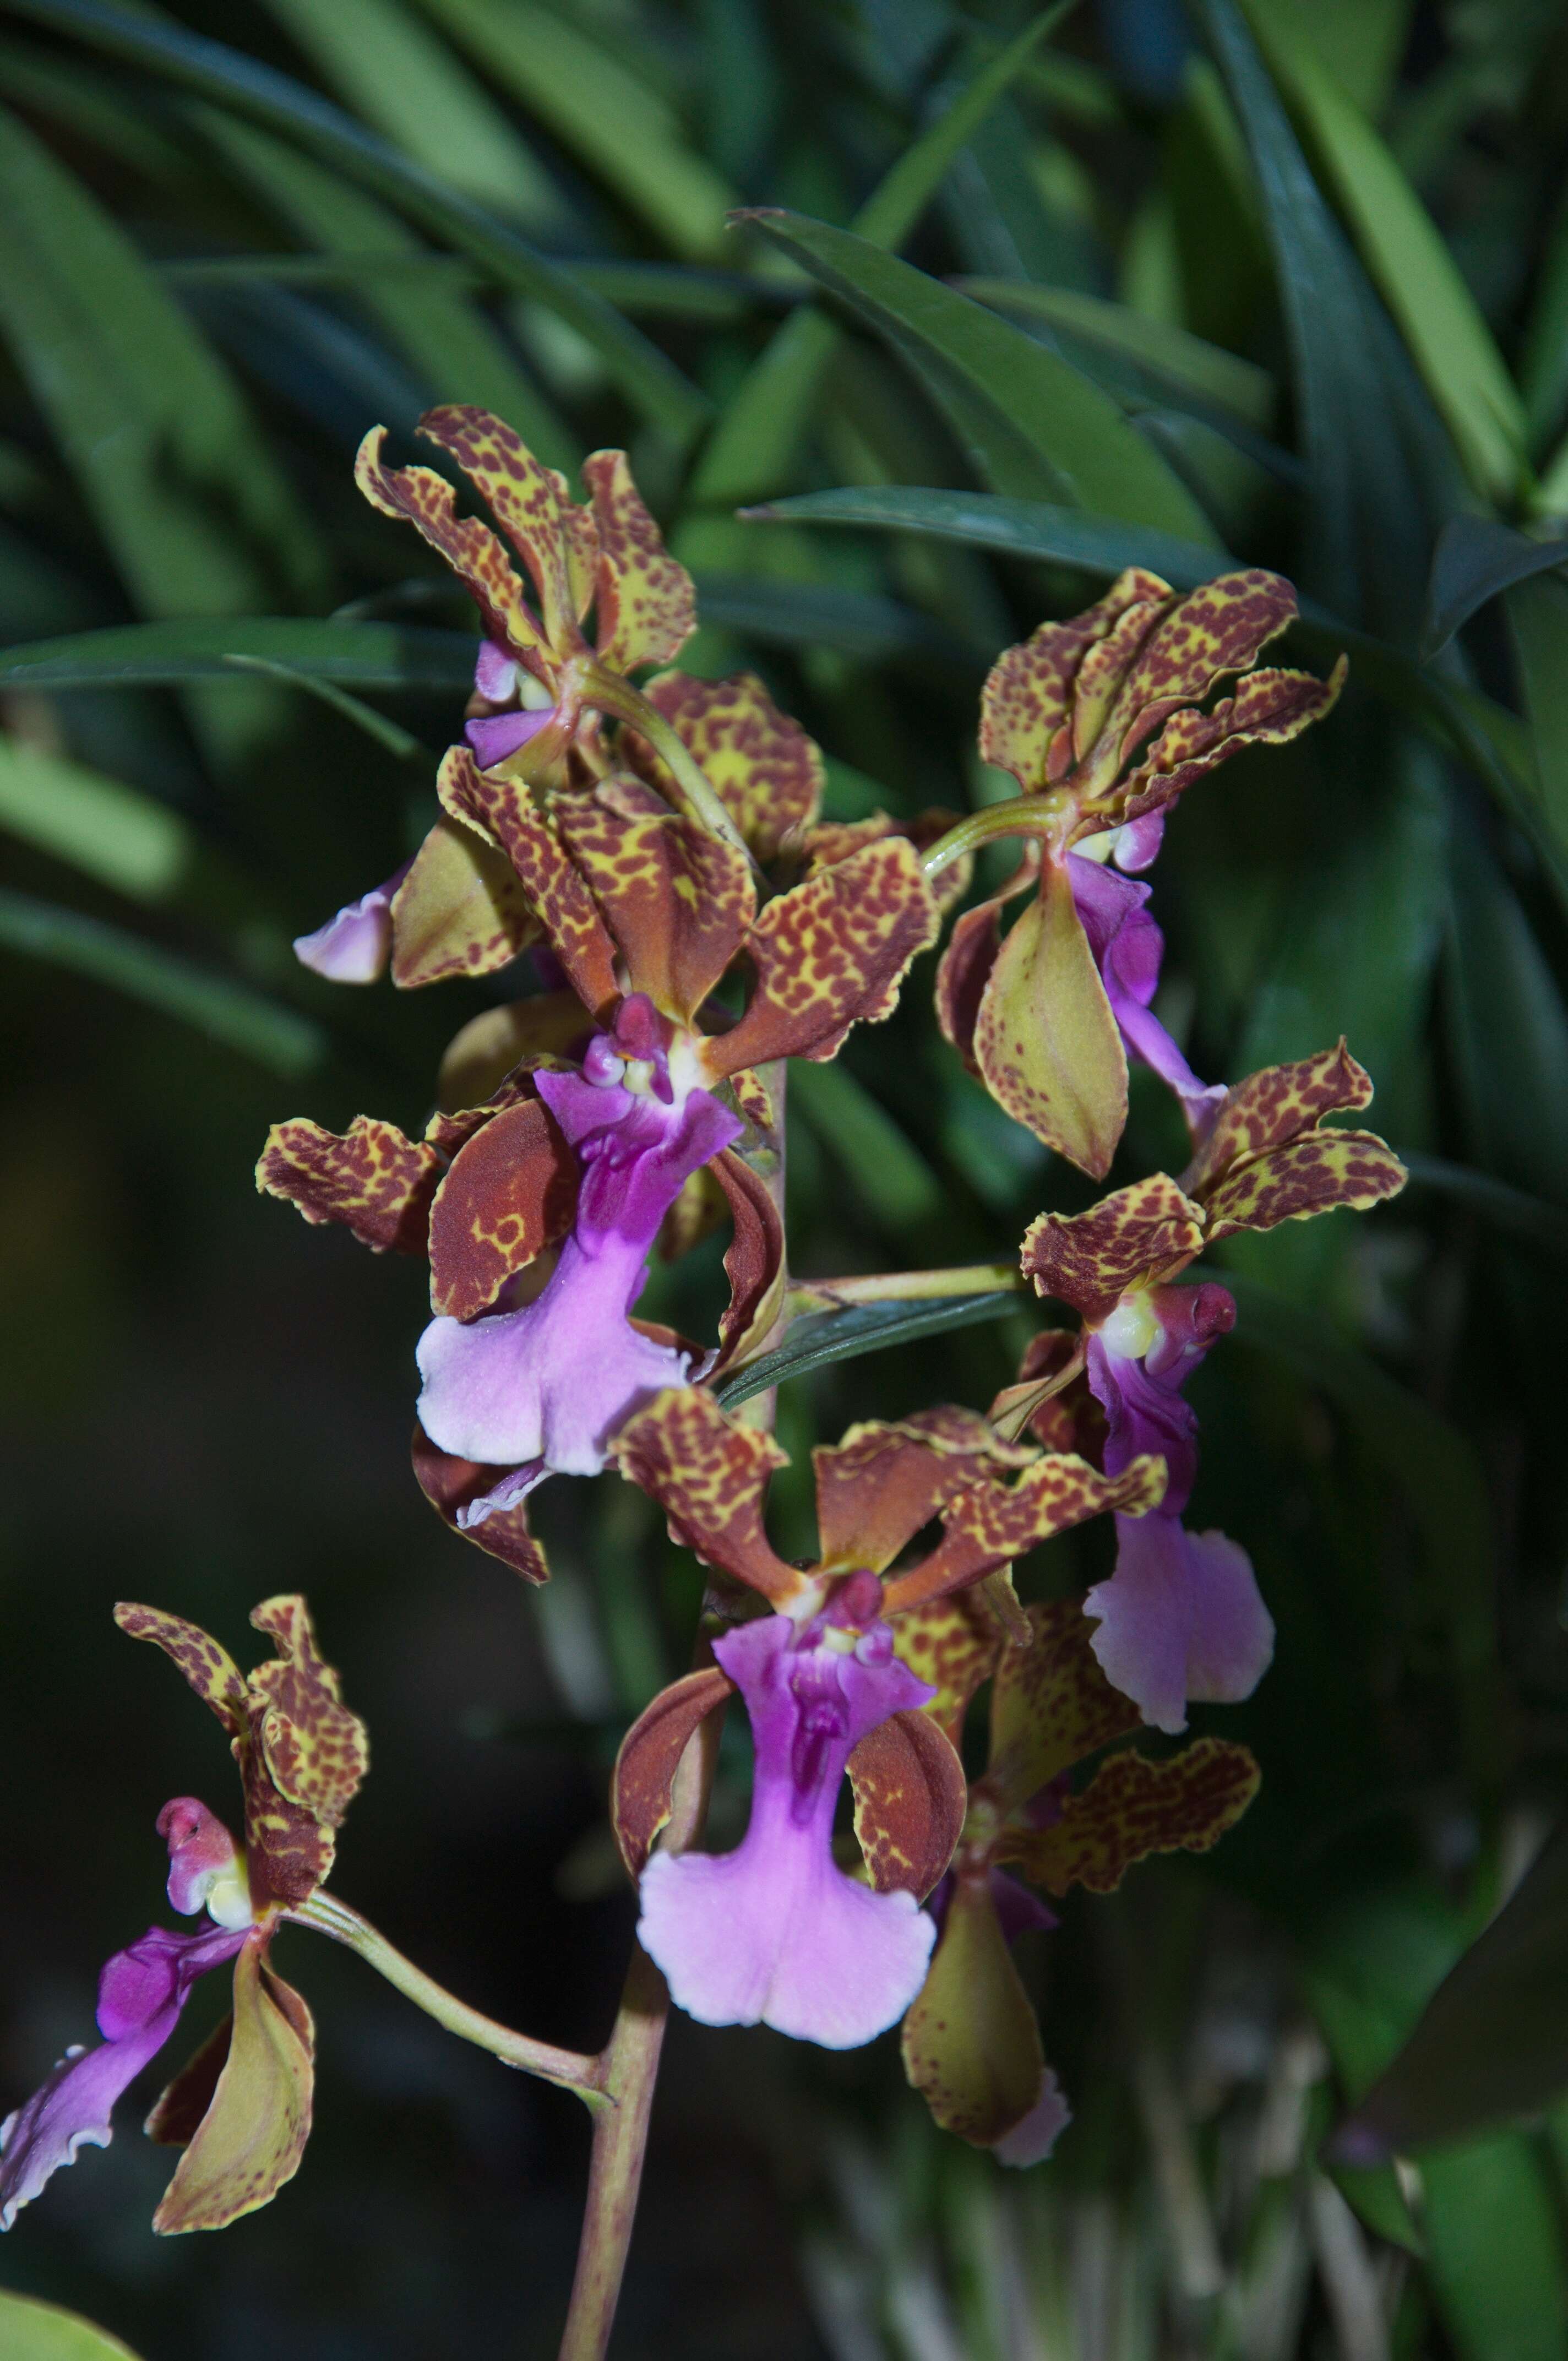 Image of dancinglady orchid